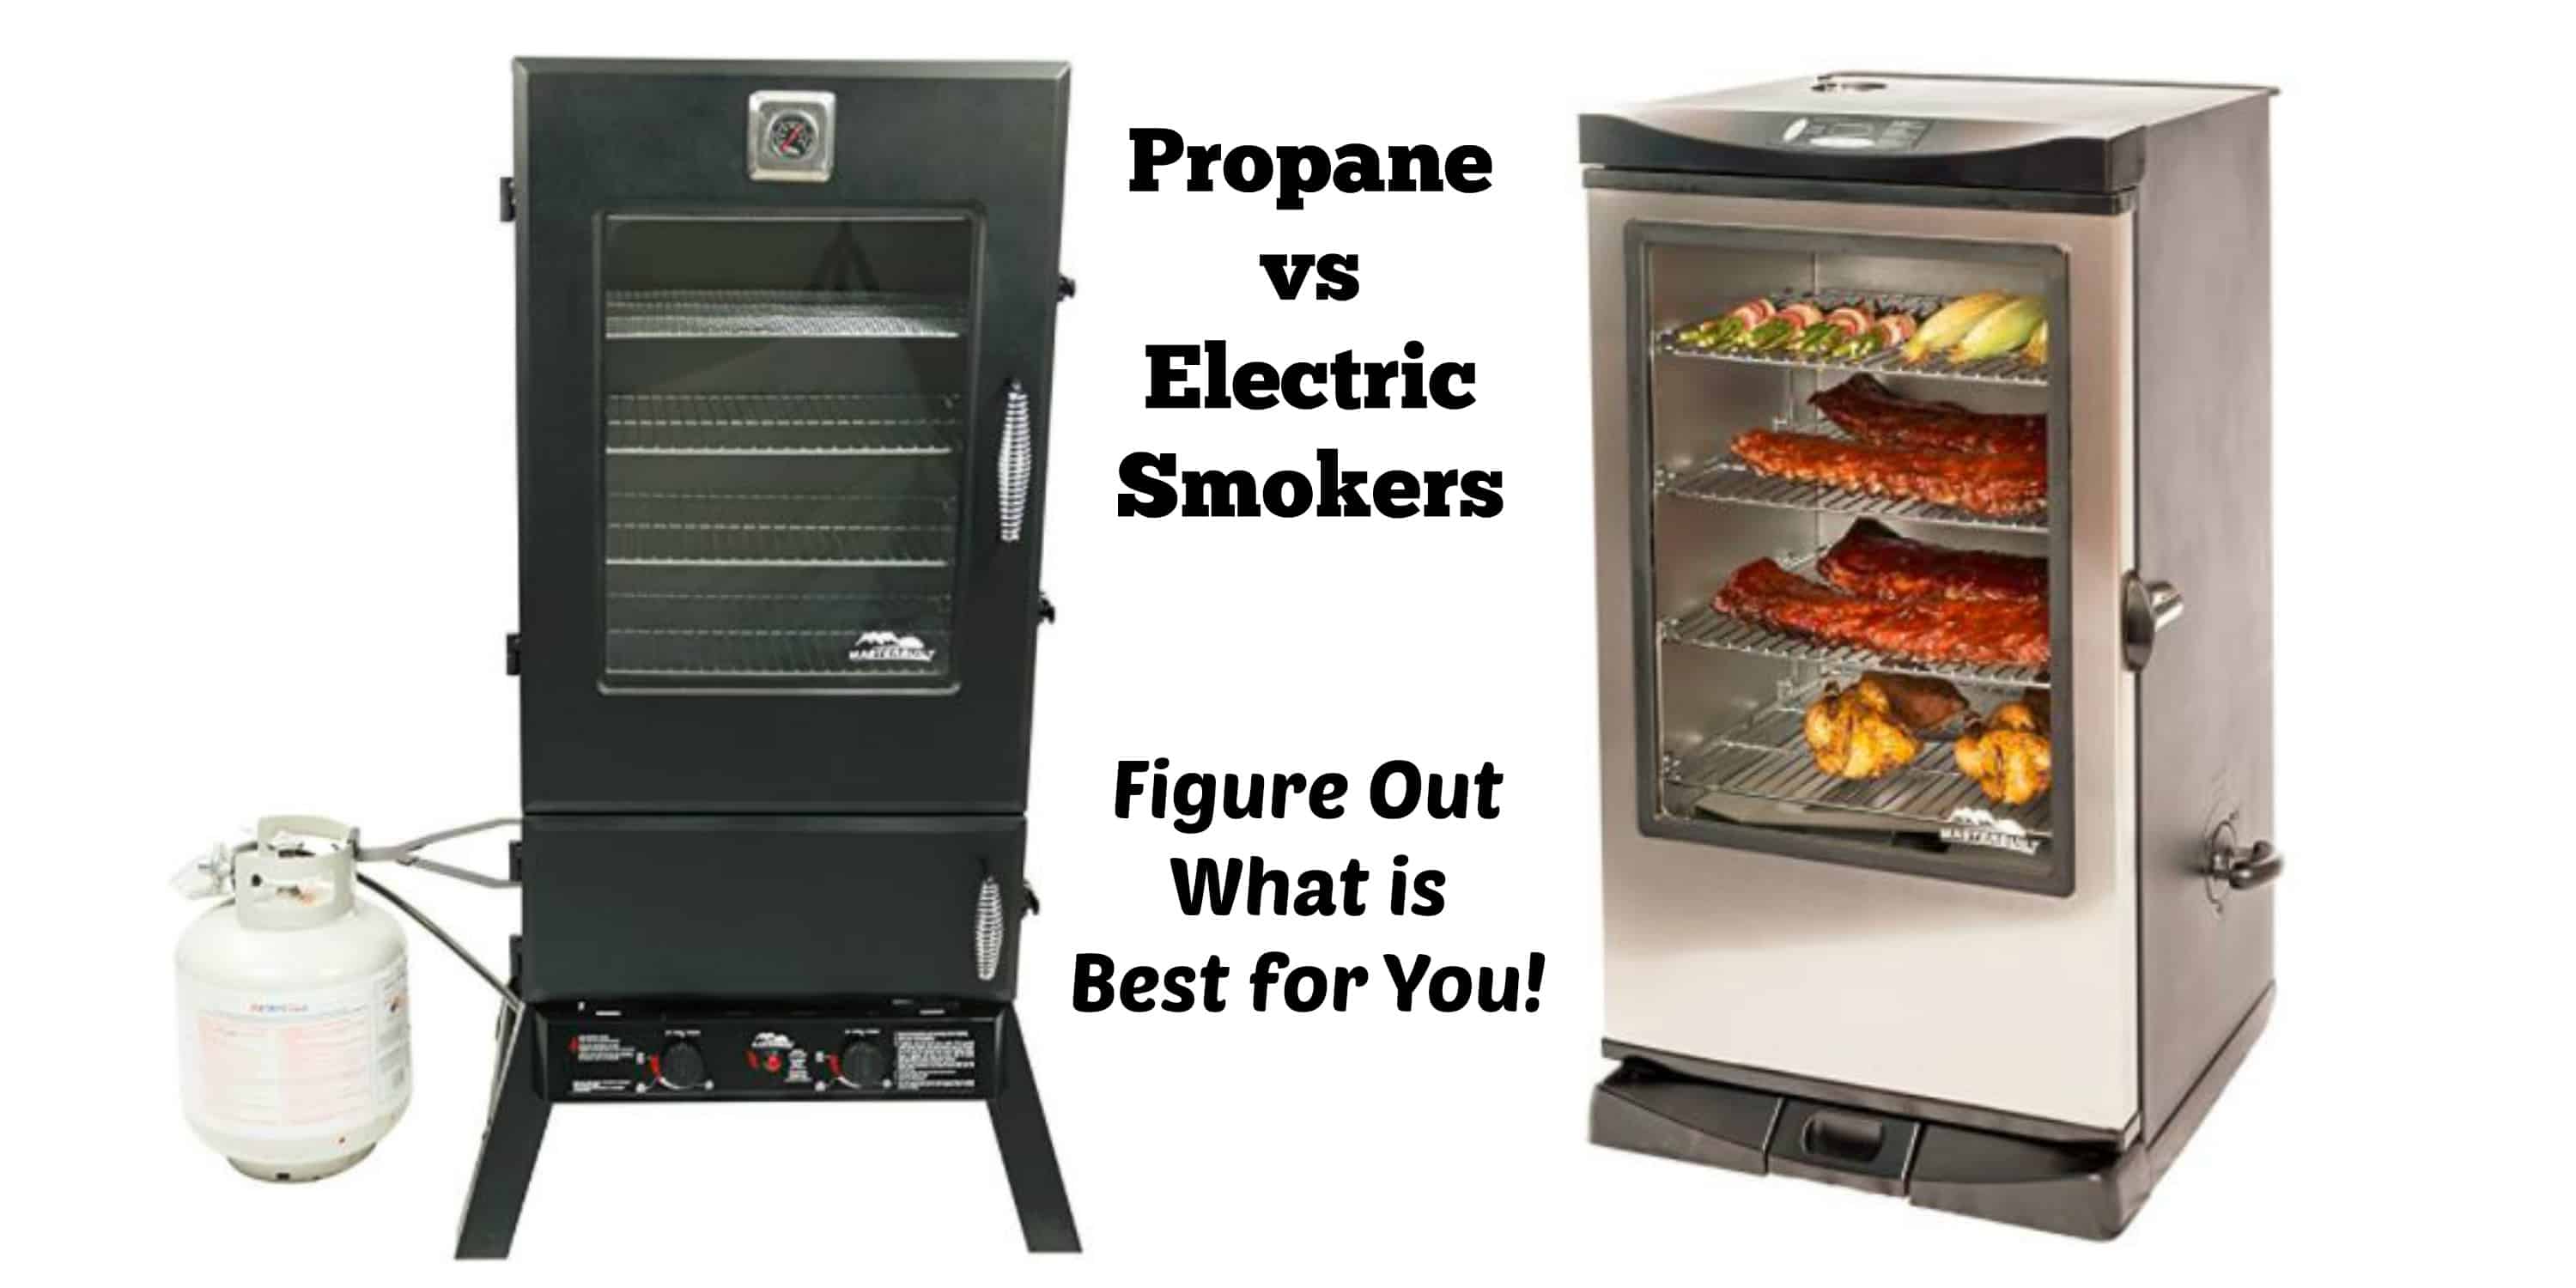 Propane vs Electric Smokers: The Big Differences That Will Matter to You